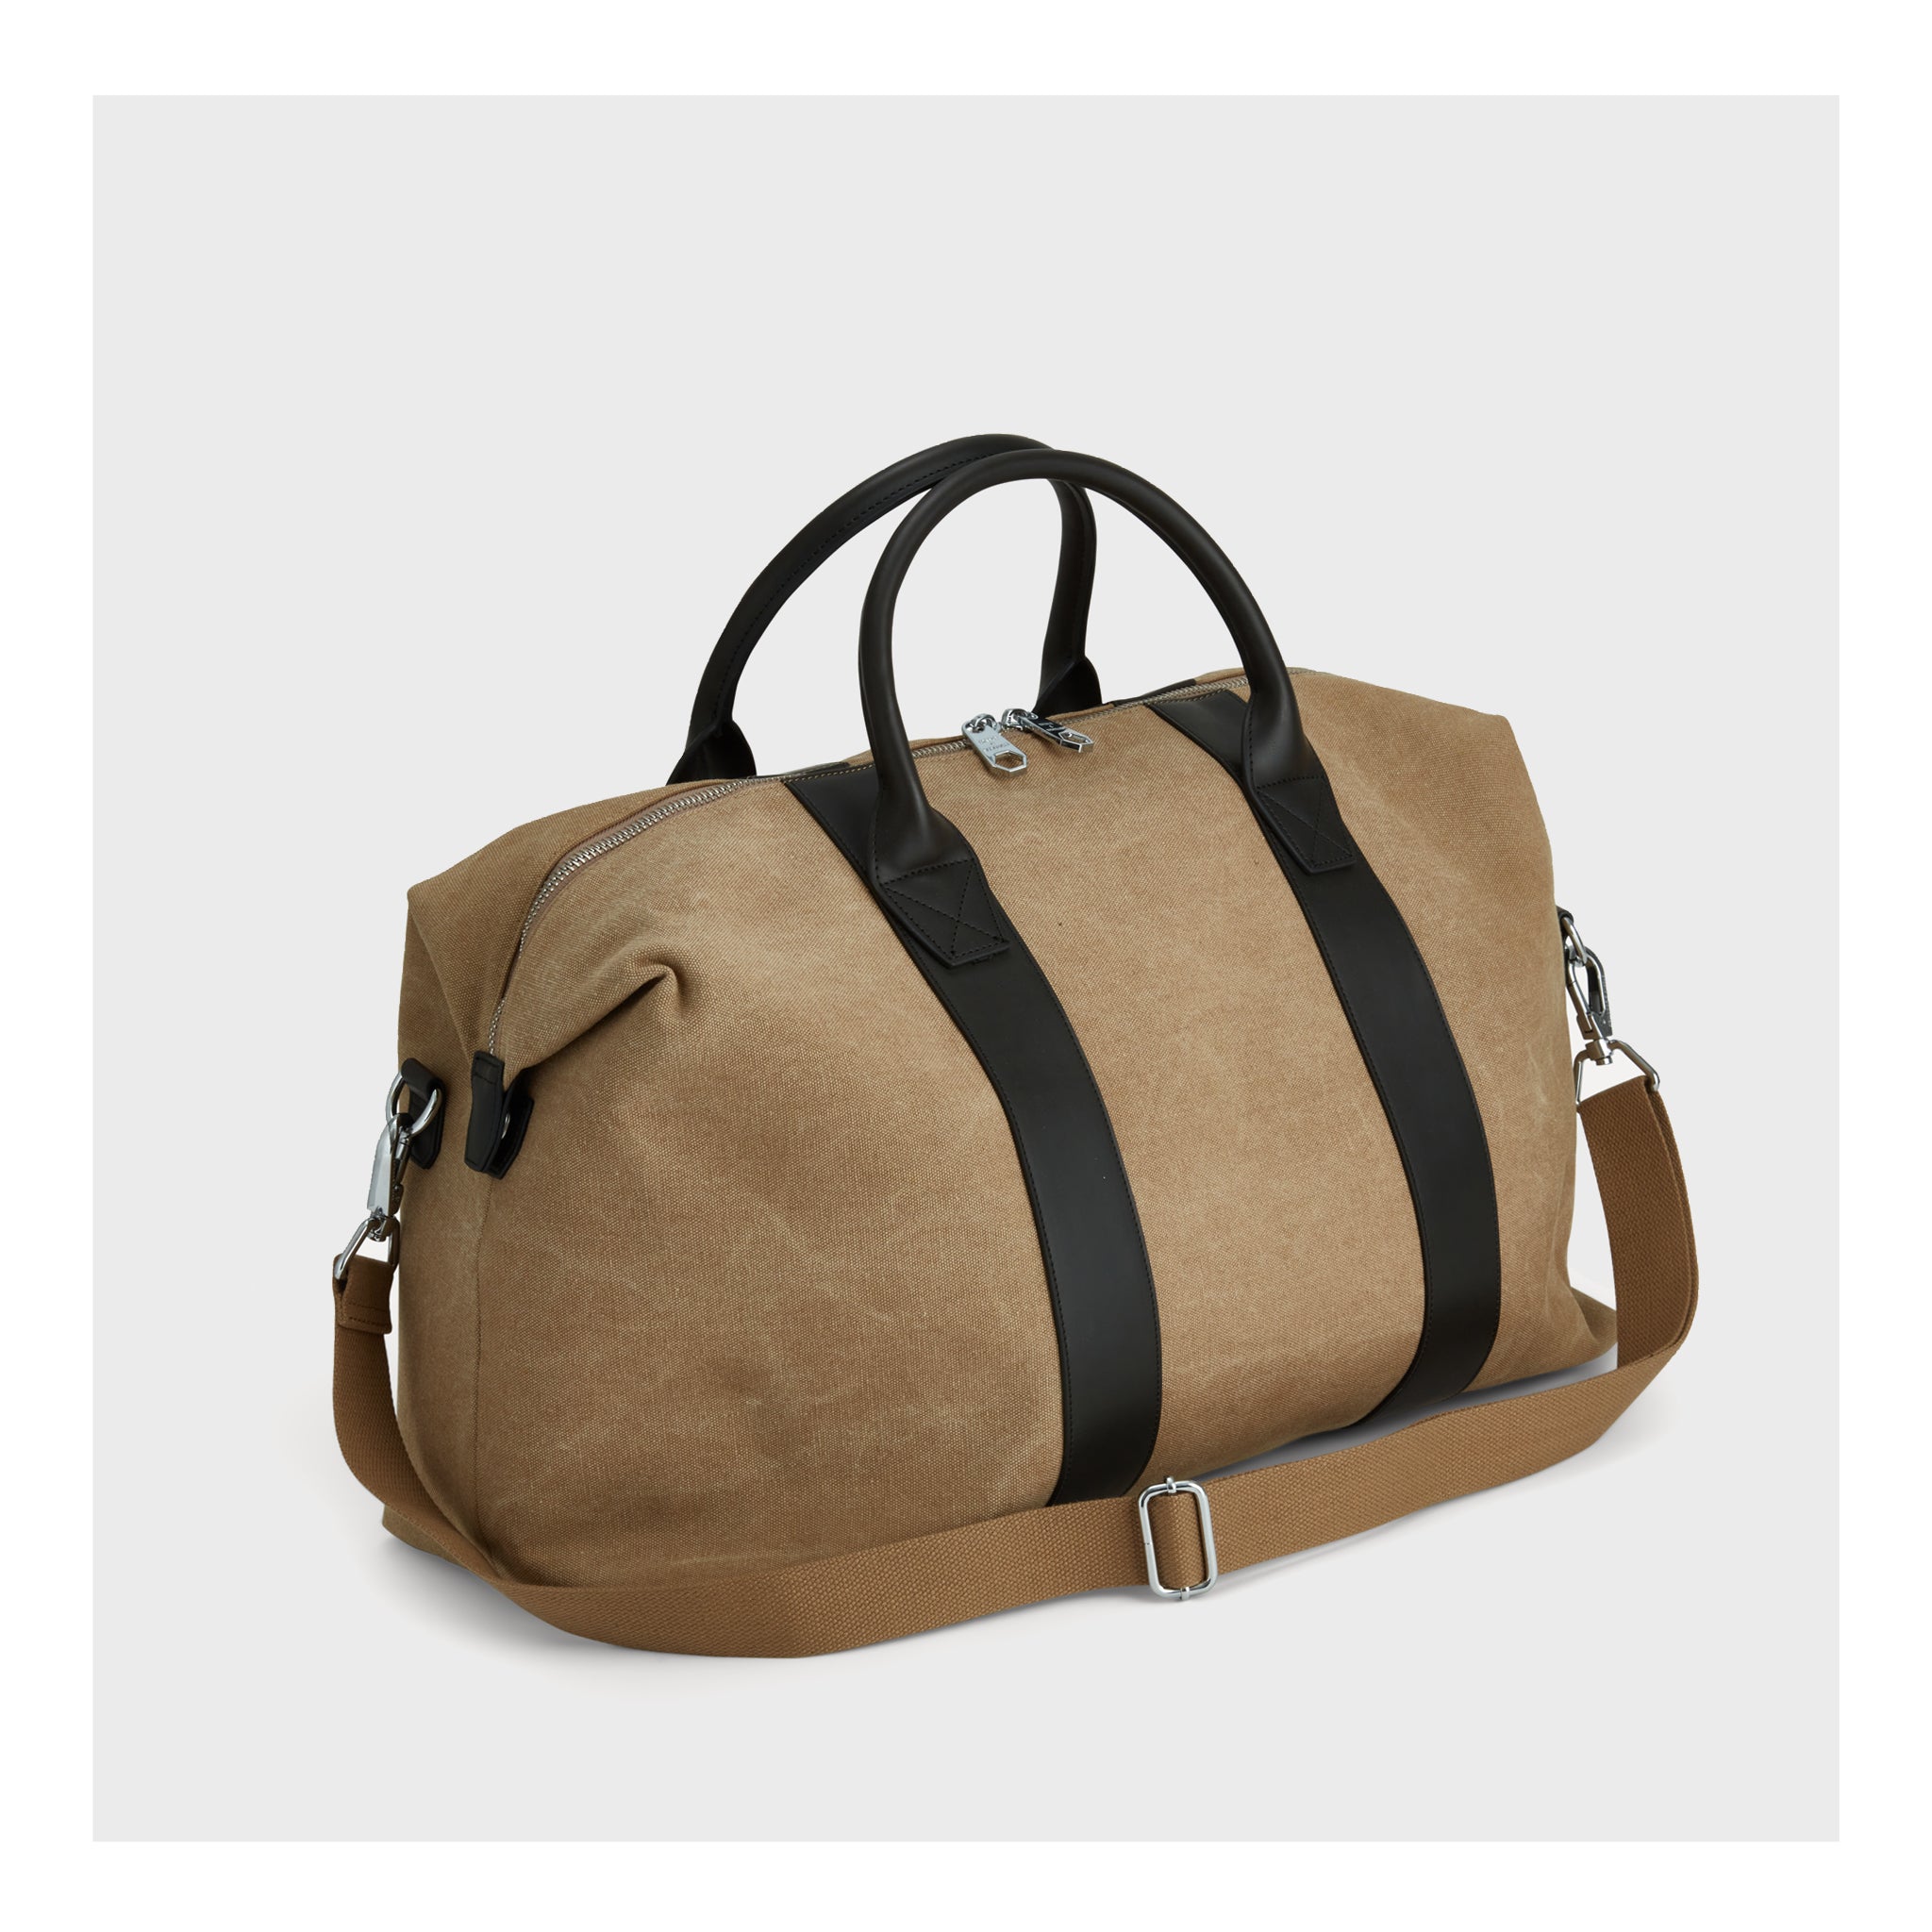 Angled perspective of the Khaki Overnight Bag, showcasing the quality material and functional design